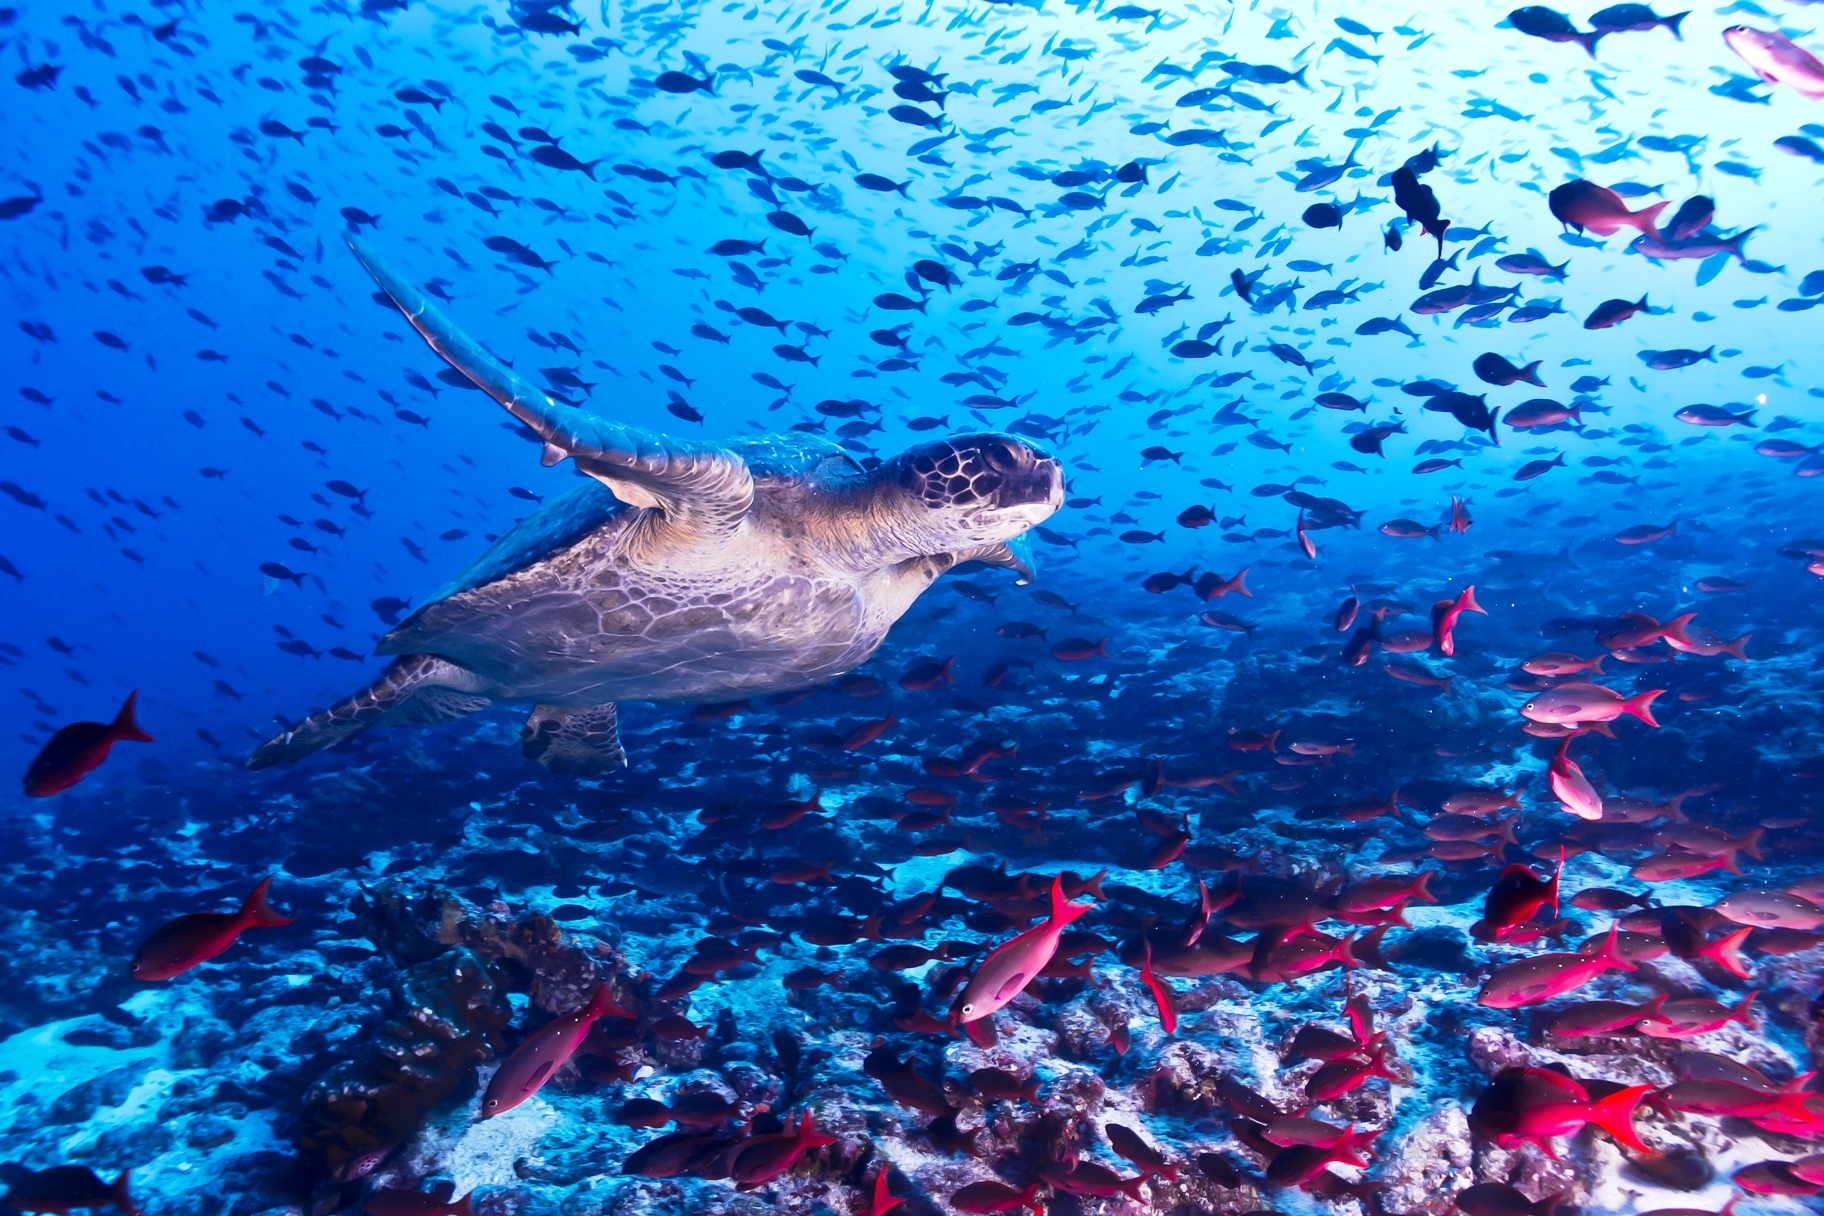 Turtle surrounded by fish, Galapagos